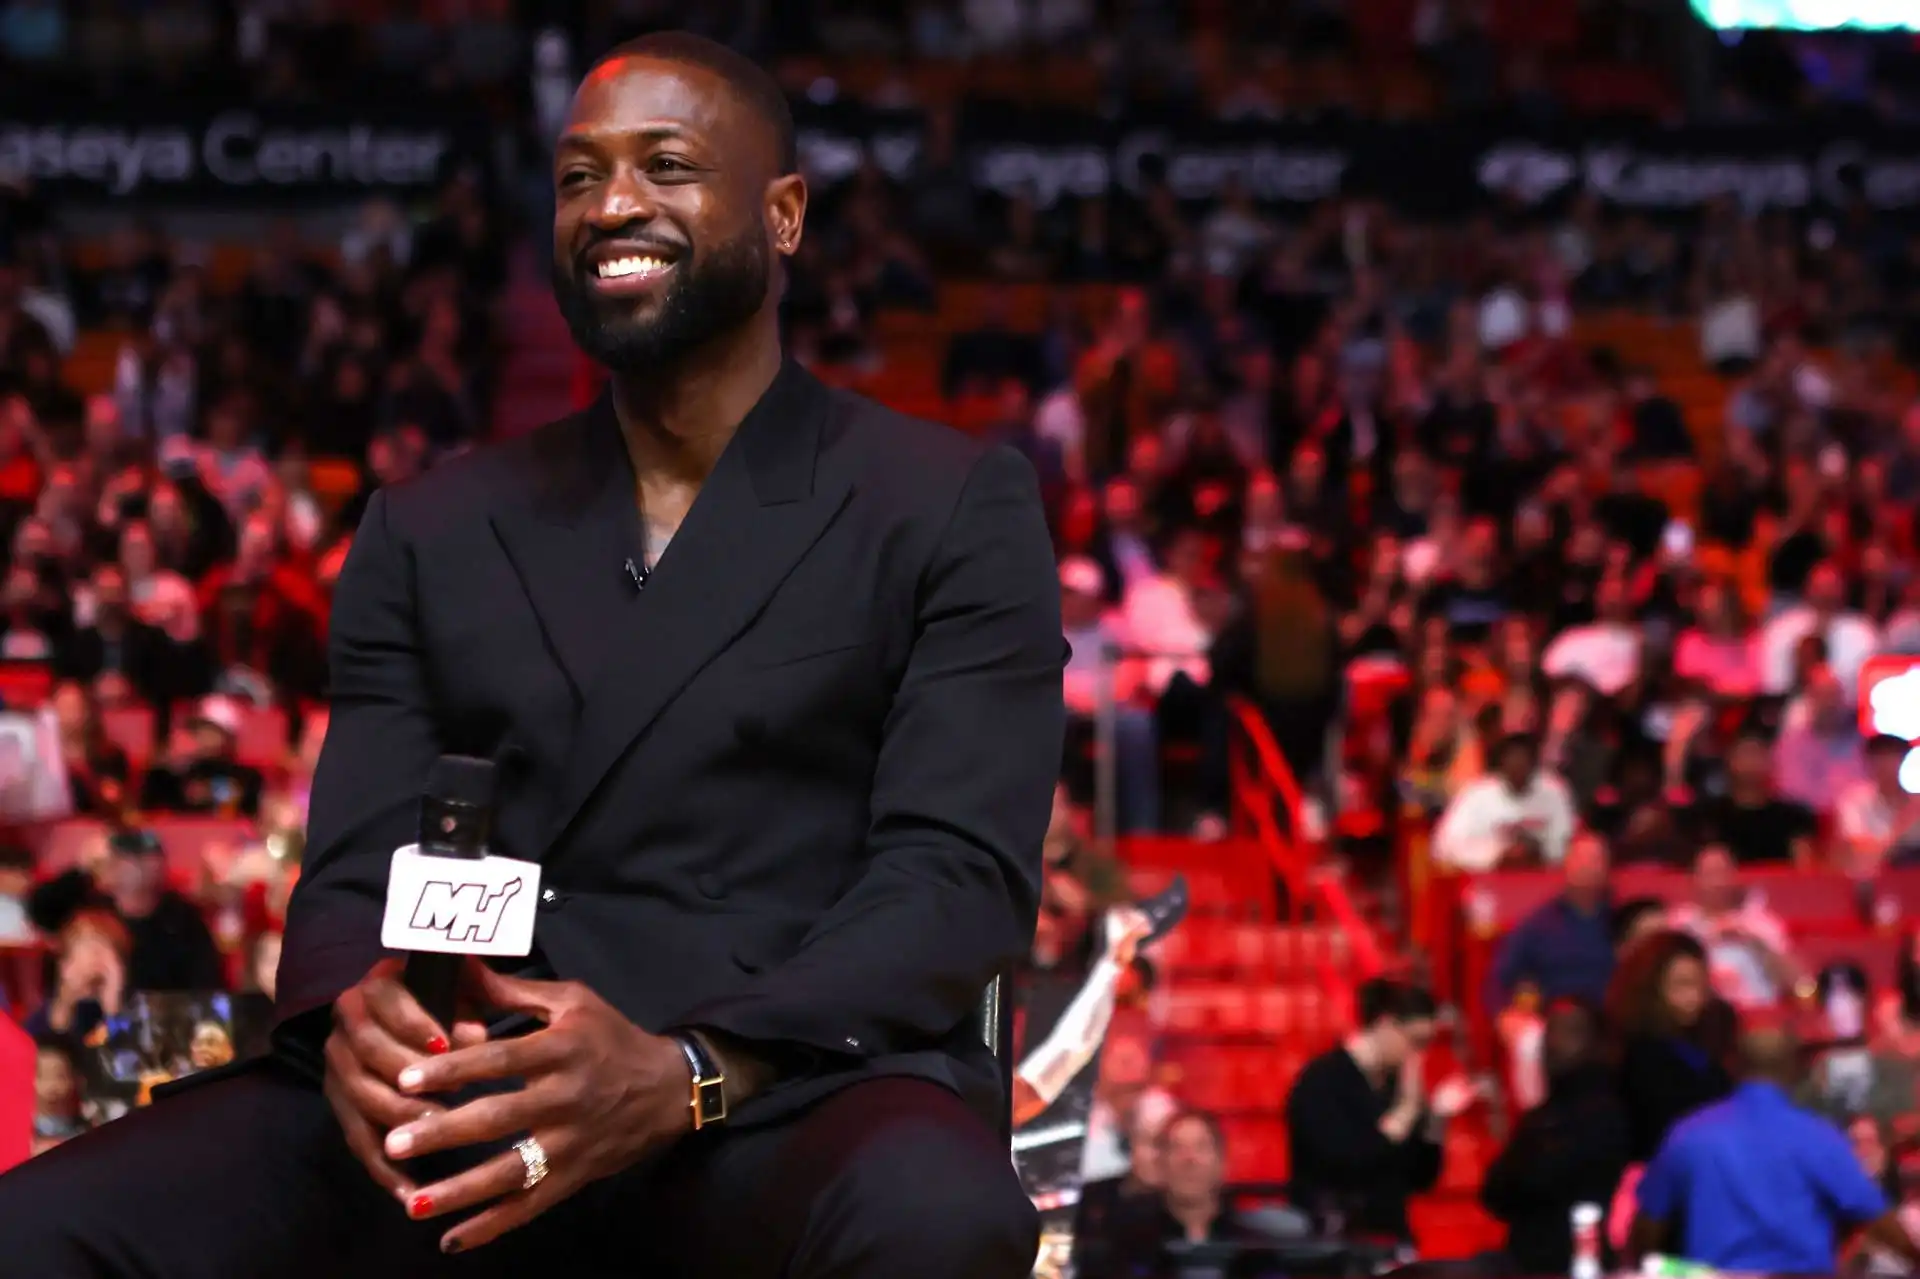 Dwyane Wade aims to win an Oscar and follow Kobe Bryant's Hollywood footsteps